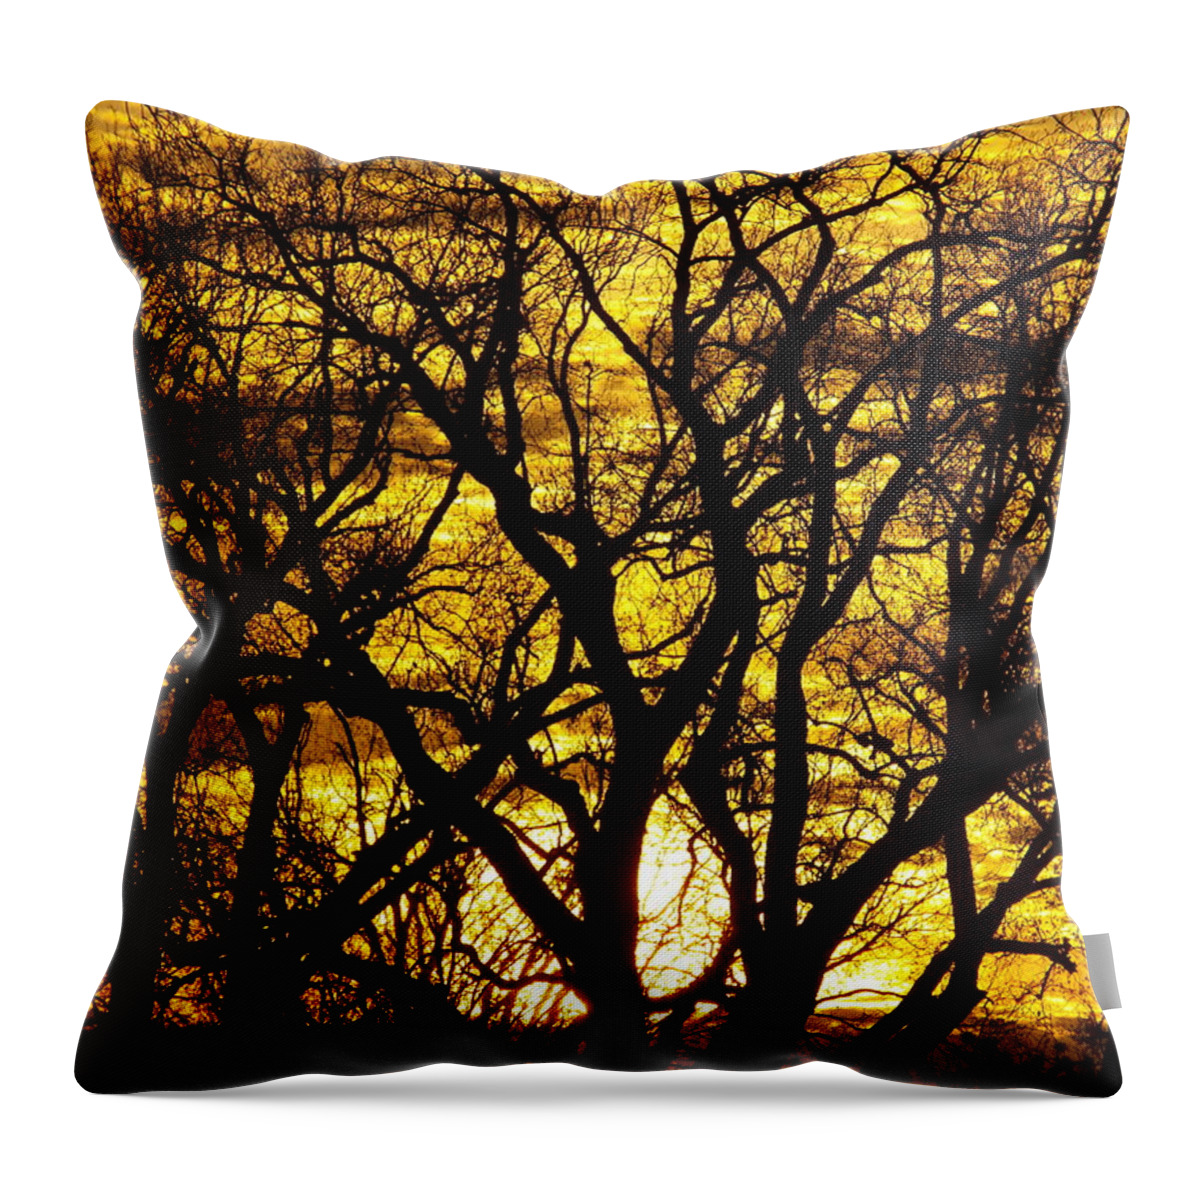 Sunset Throw Pillow featuring the photograph Bastrop Sunset by James Granberry